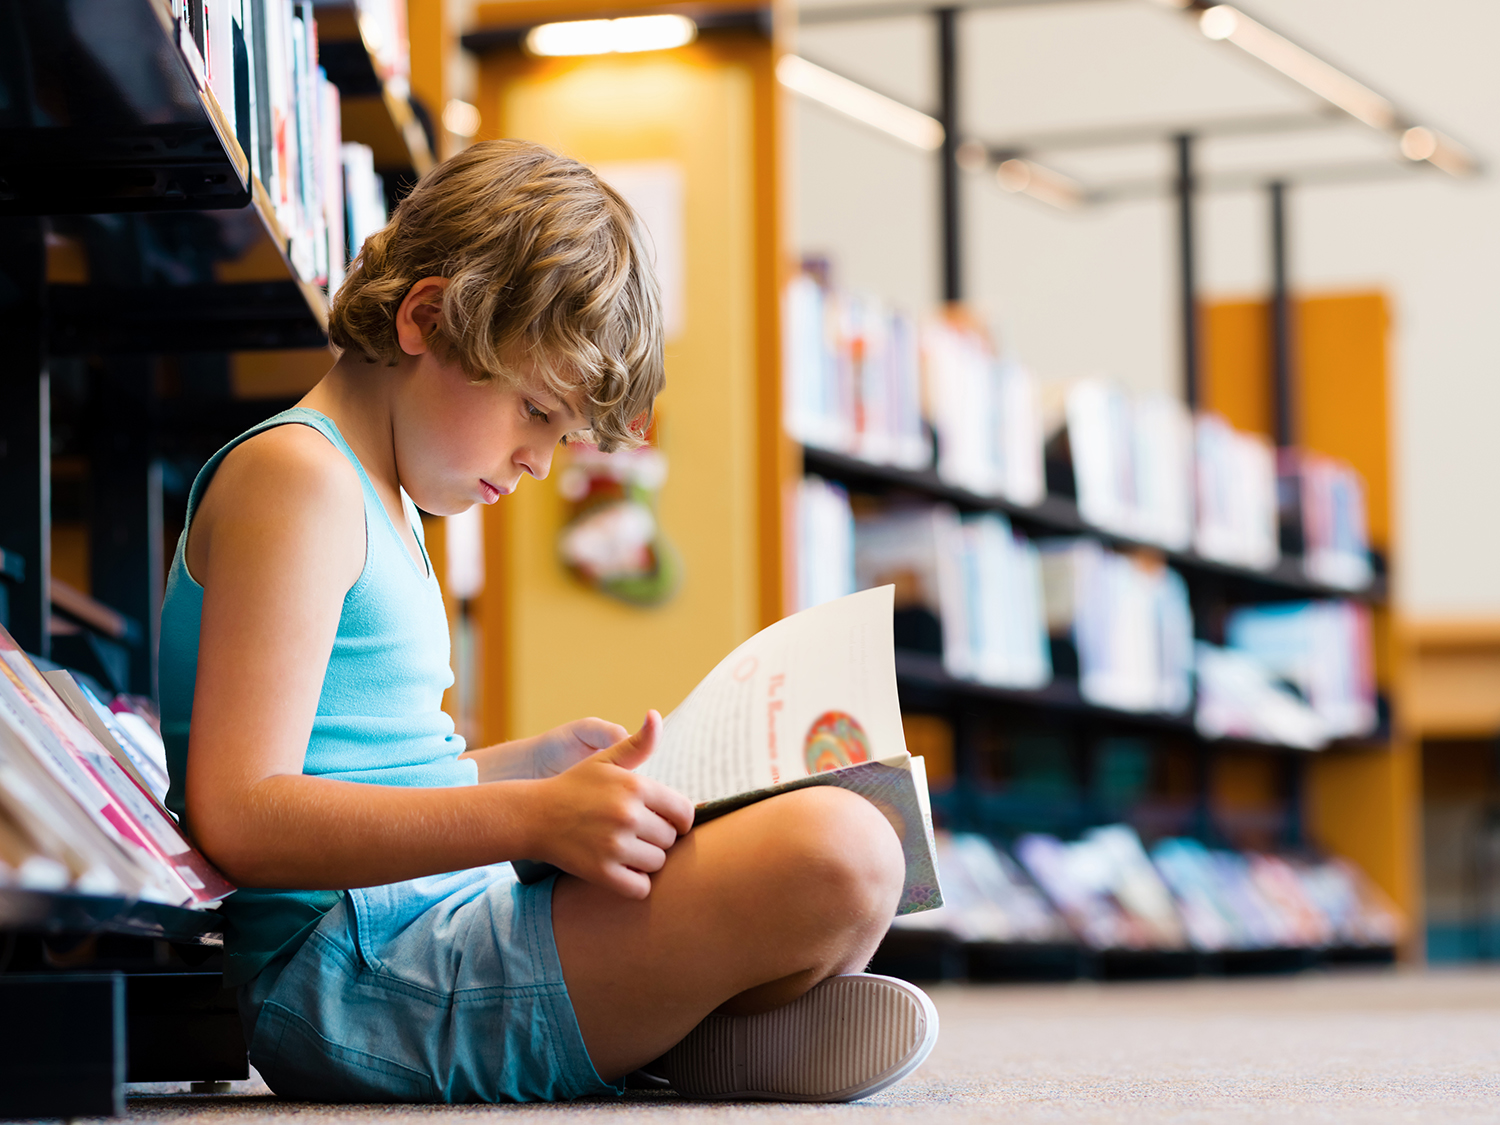 6 Great Reasons to Support Your Local Public Library